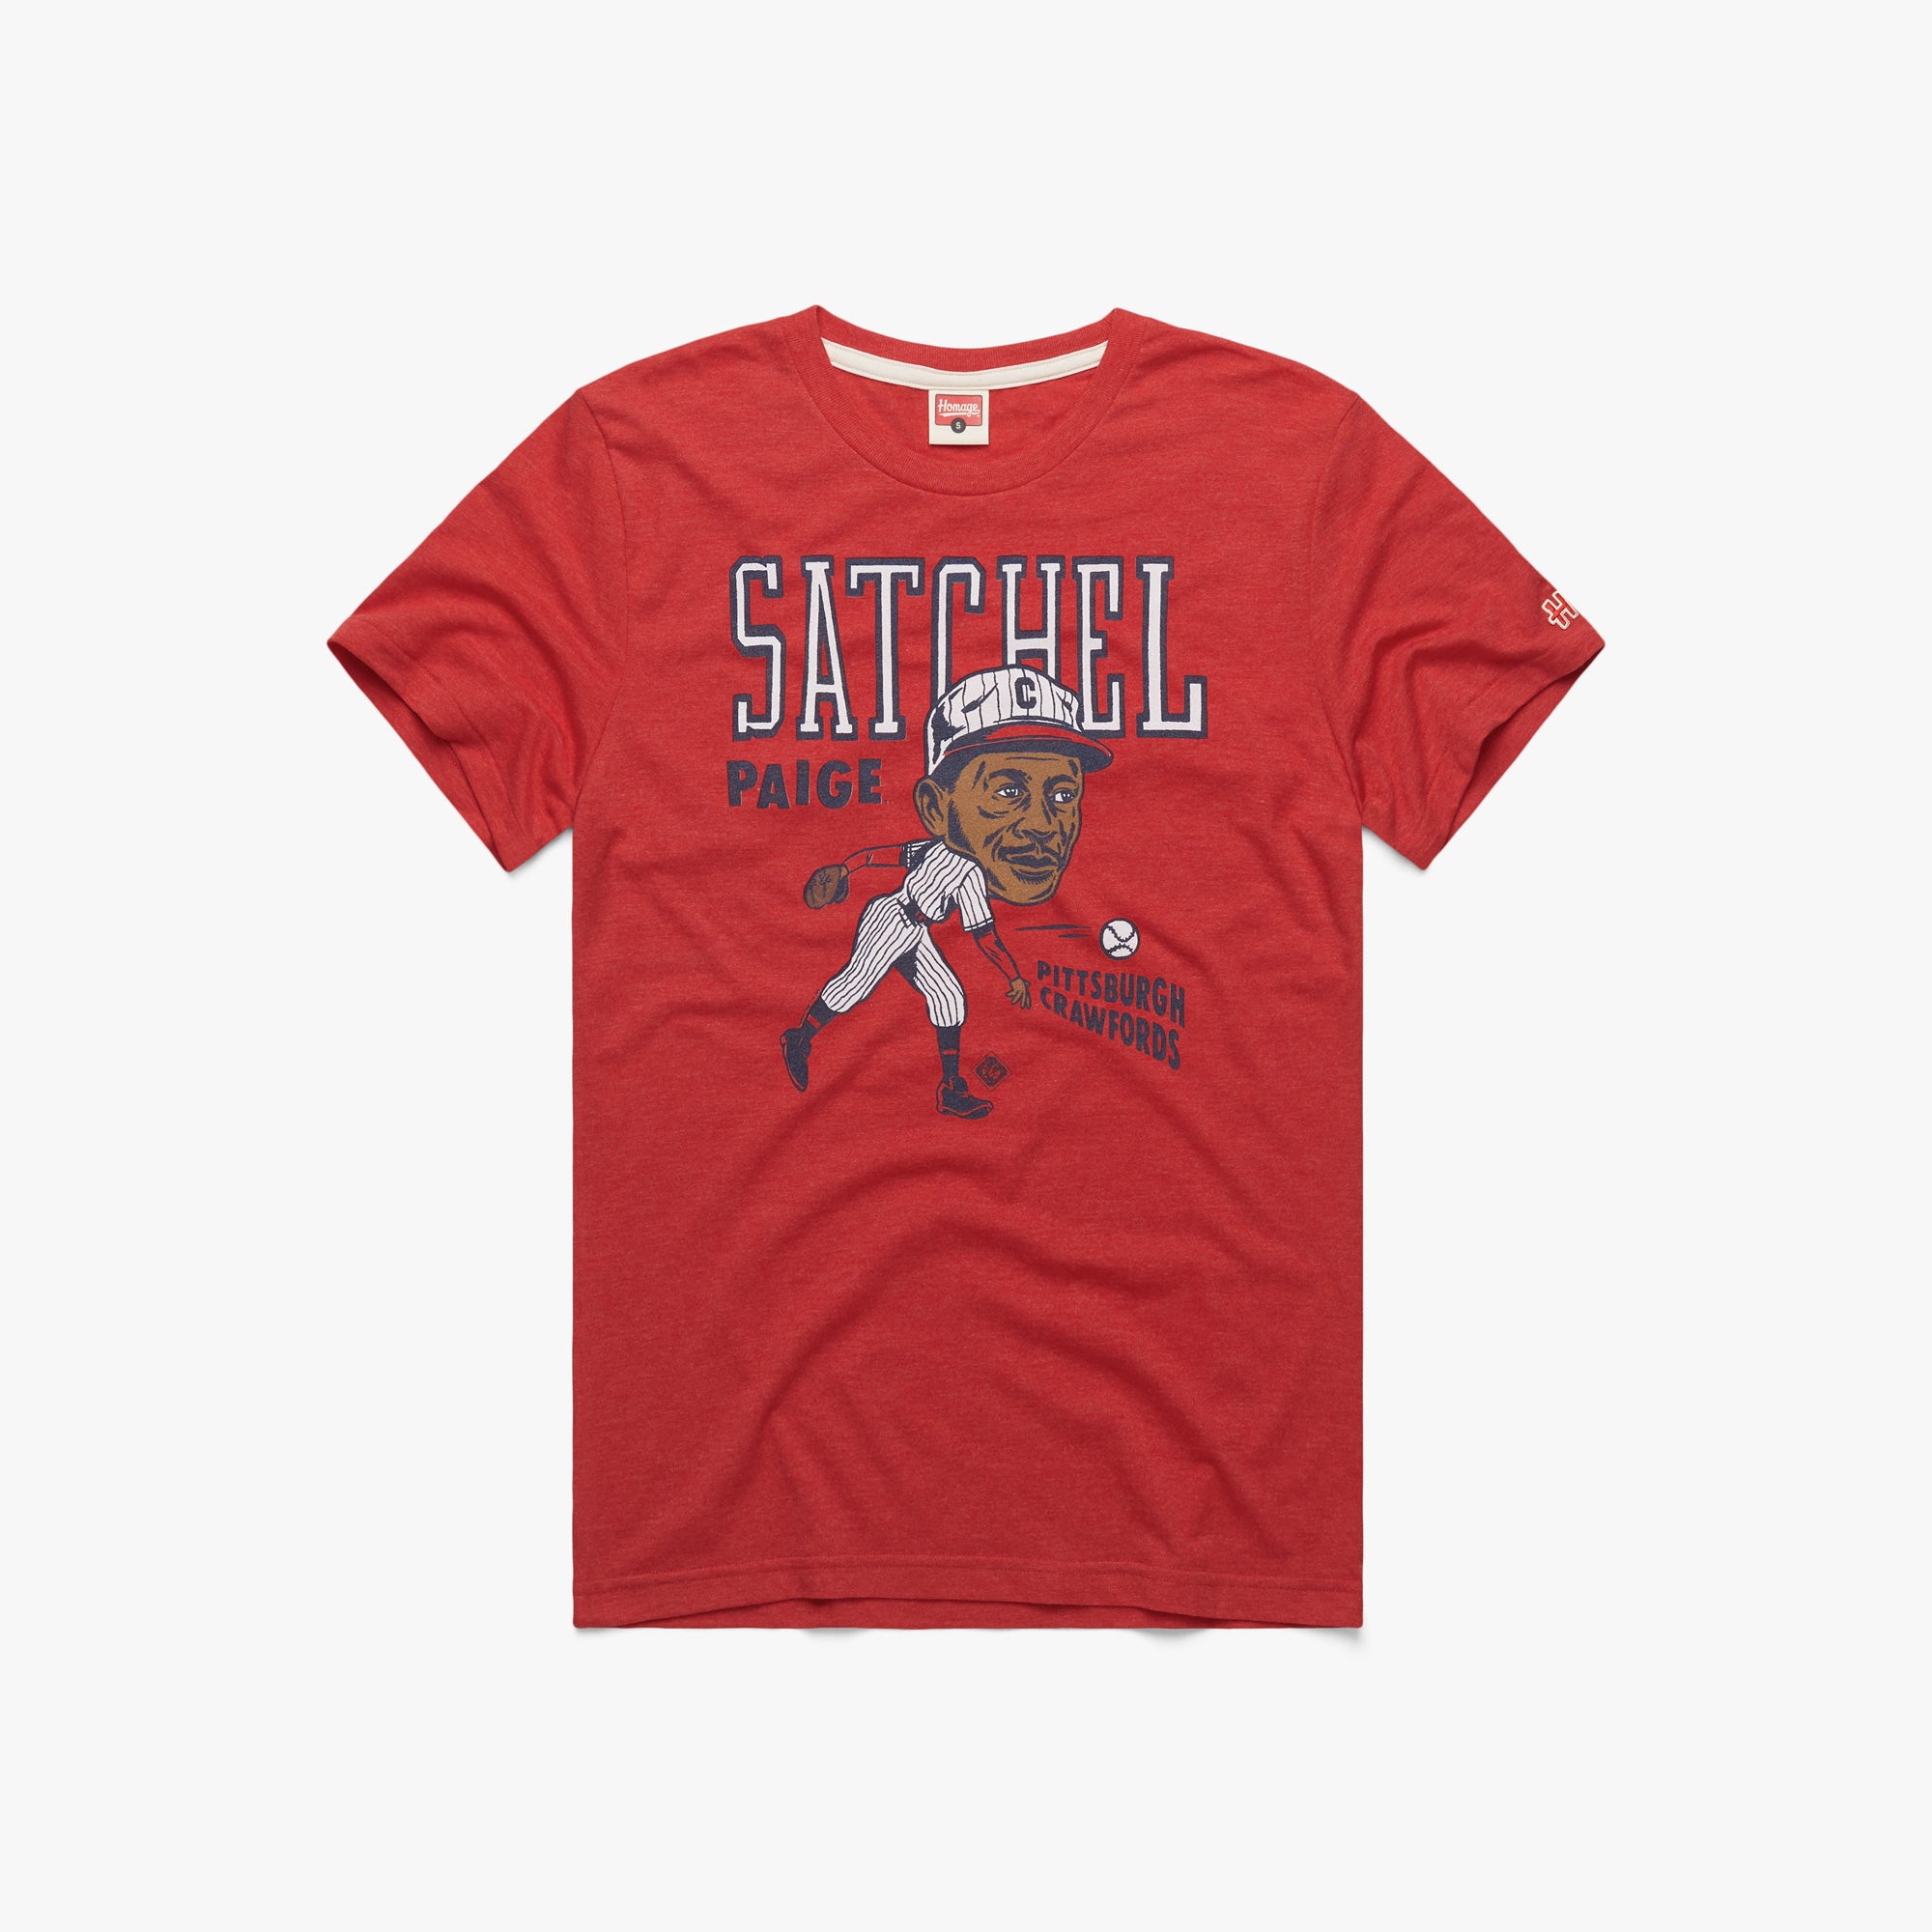 Pittsburgh Crawfords Satchel Paige T-Shirt from Homage. | Red | Vintage Apparel from Homage.